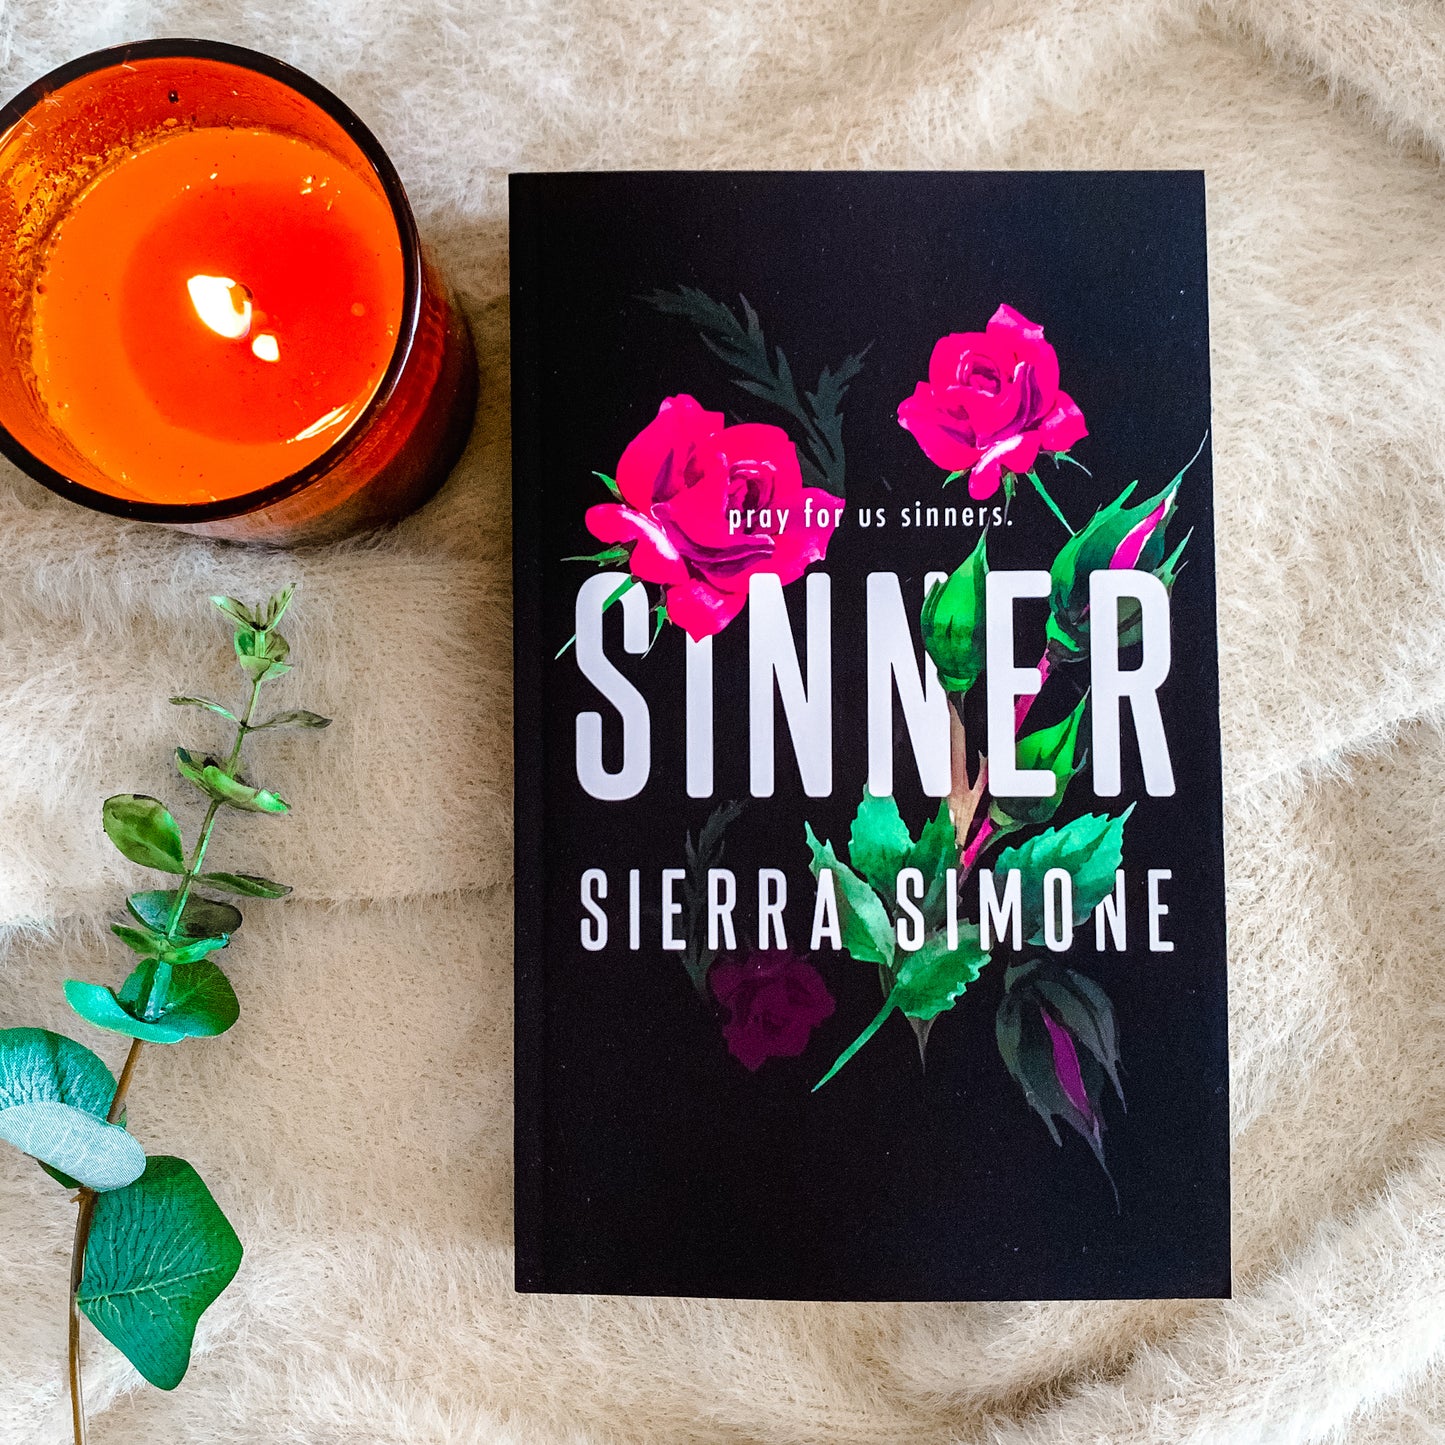 Priest Series Special Editions by Sierra Simone